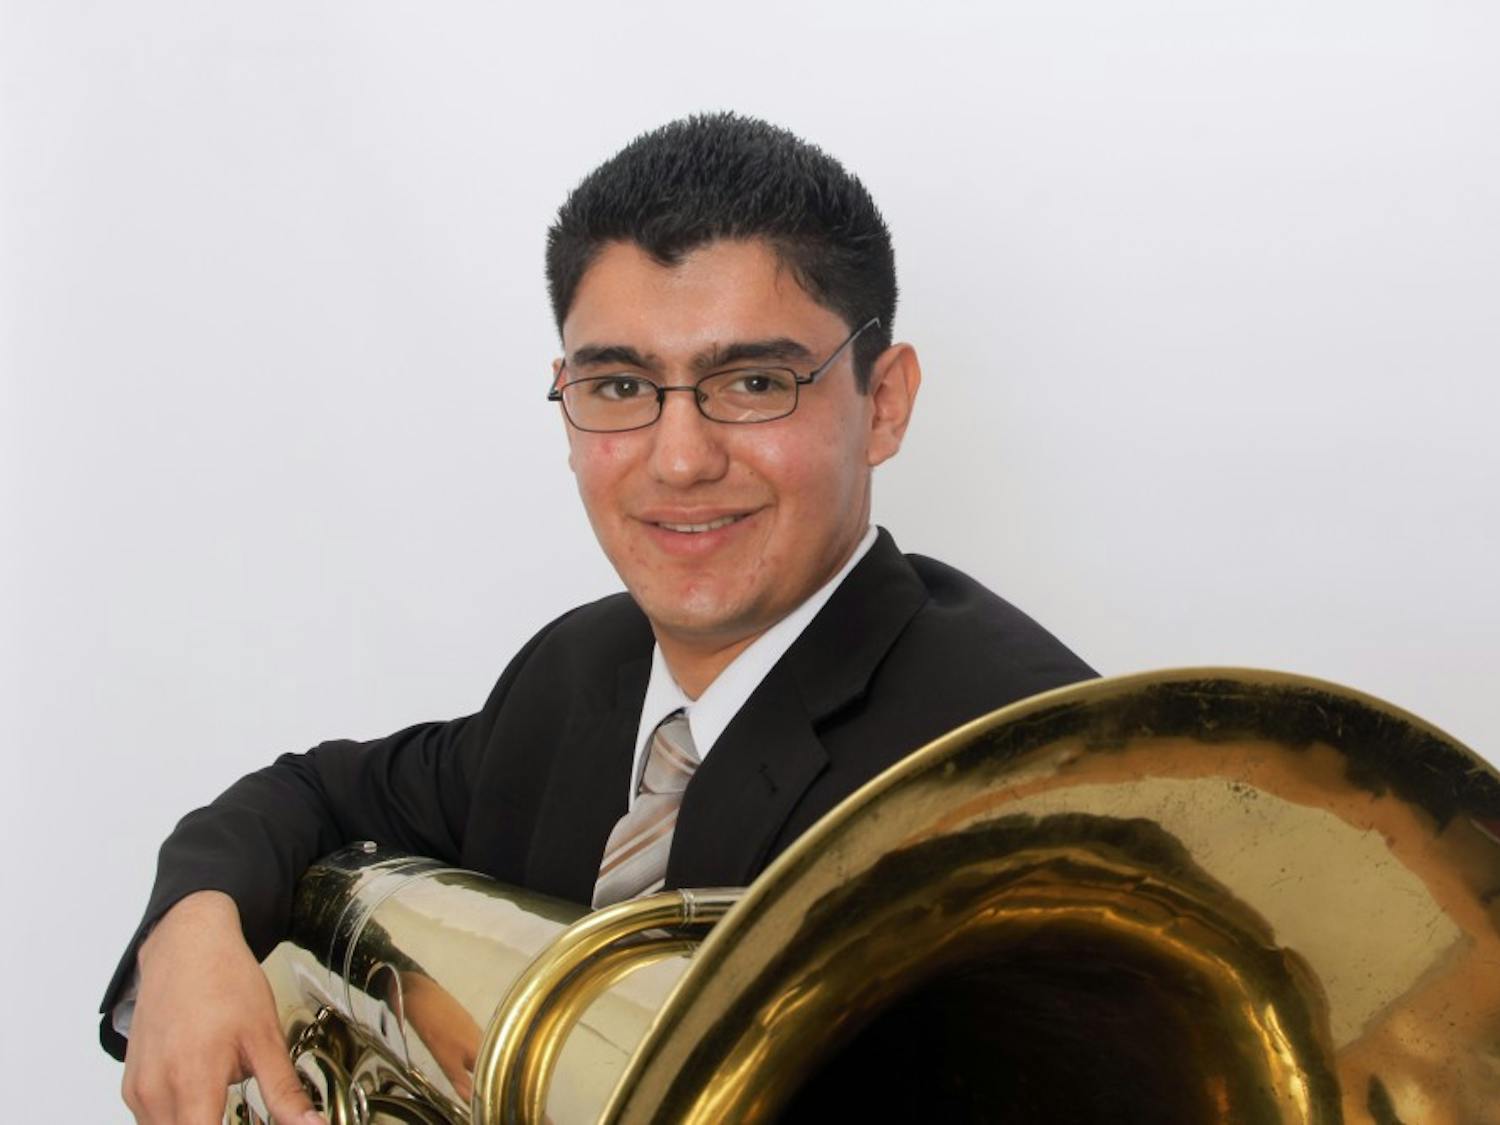 Third-year undergraduate music performance student Ramon Garavito, Jr. poses with his tuba in September,&nbsp;2014. He will be performing in his fourth undergraduate recital on Saturday Oct. 29, 2016.